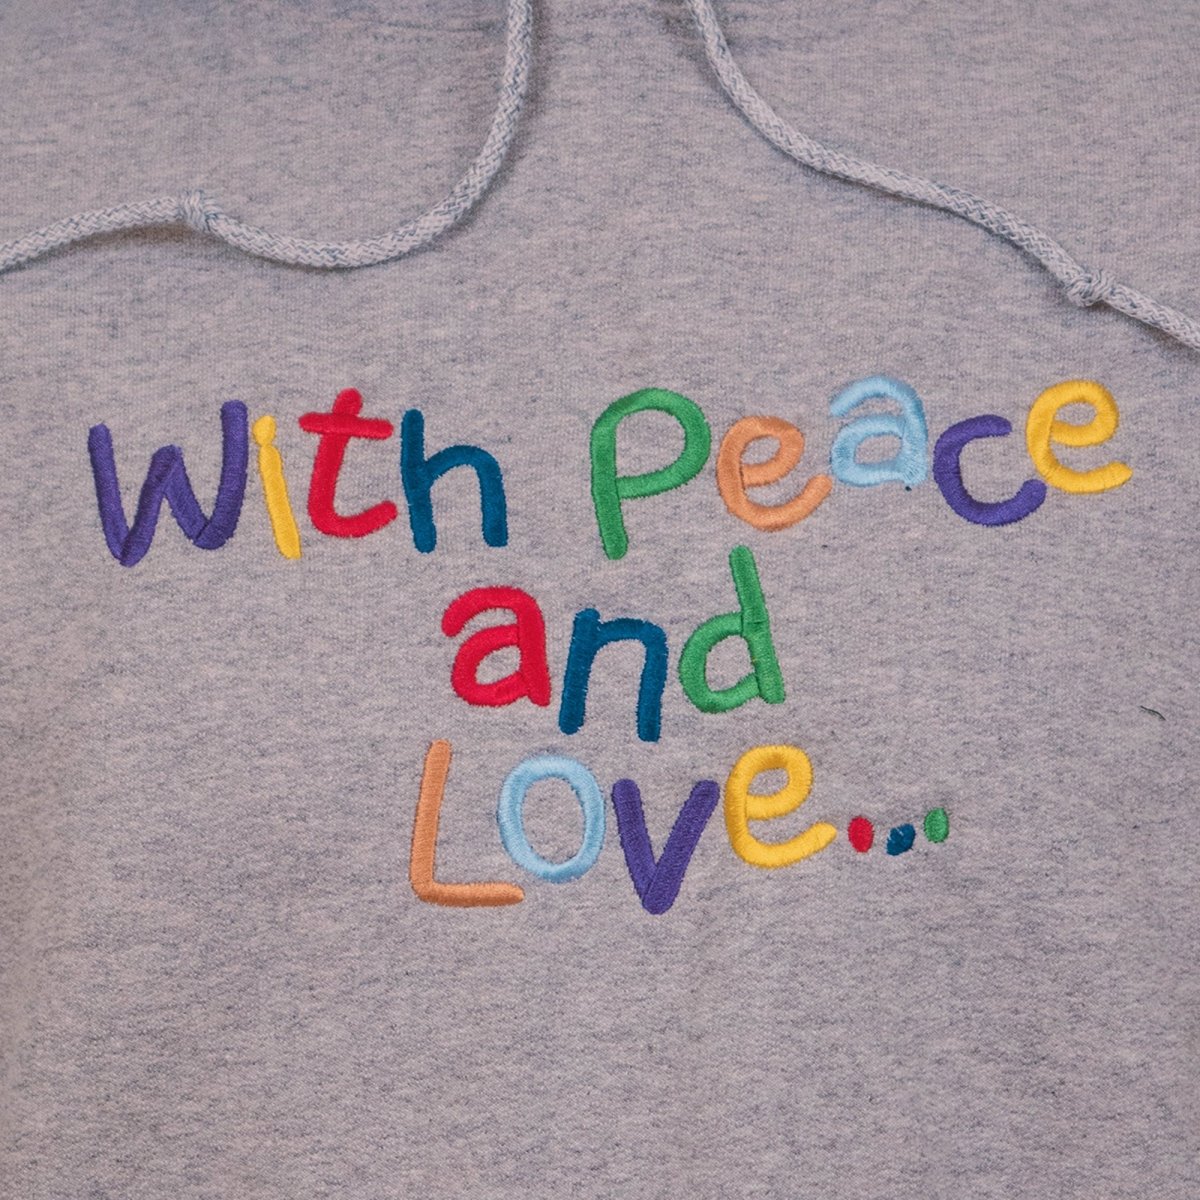 With Peace And Love... Unisex Embroidered Hoodie